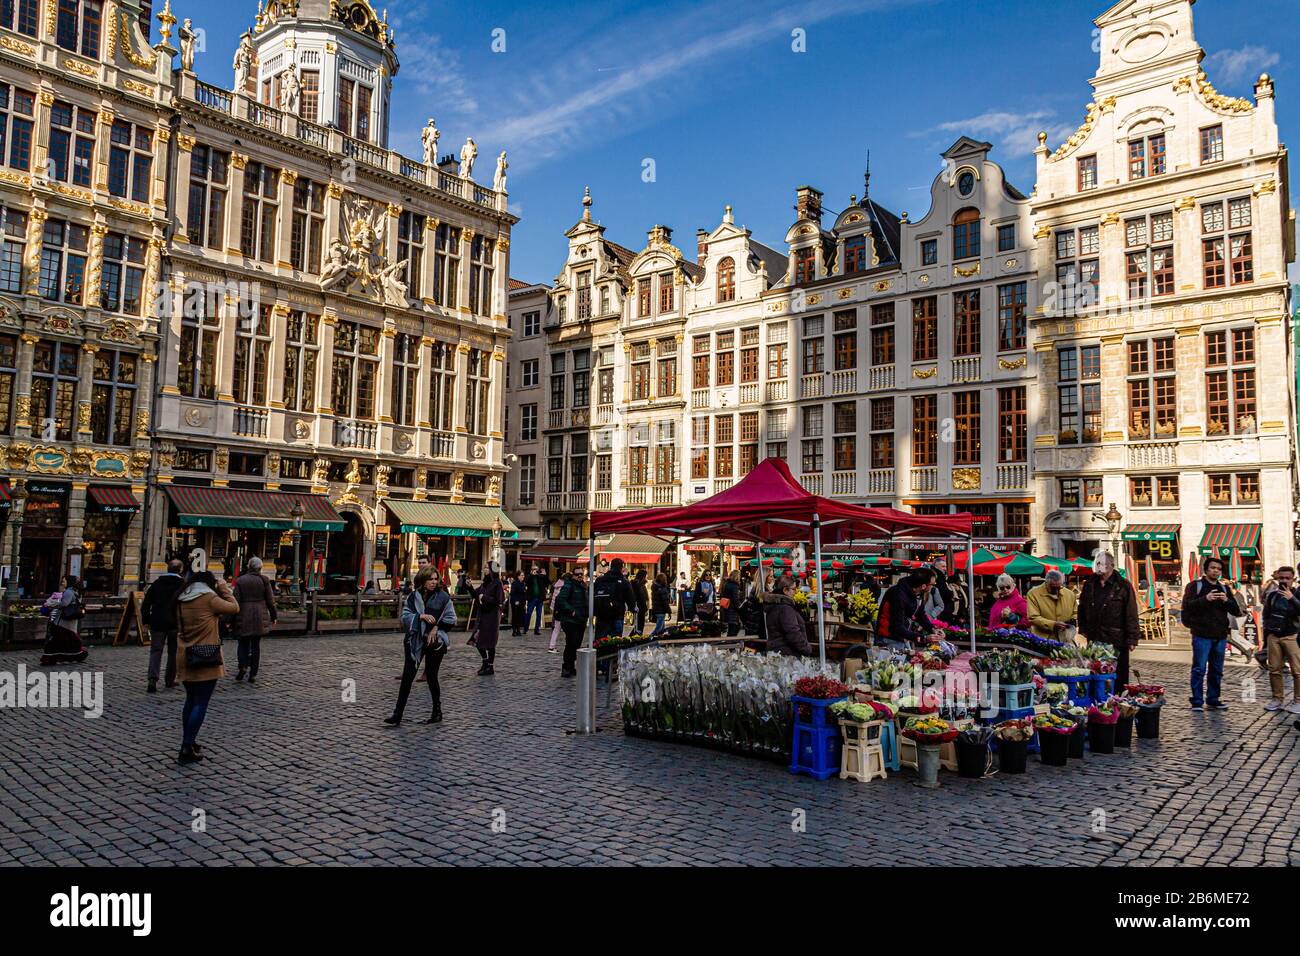 A stall selling flowers on Grand Place, the main pedestrianised square in the city centre of Brussels, capital city of Belgium. March 2019. Stock Photo